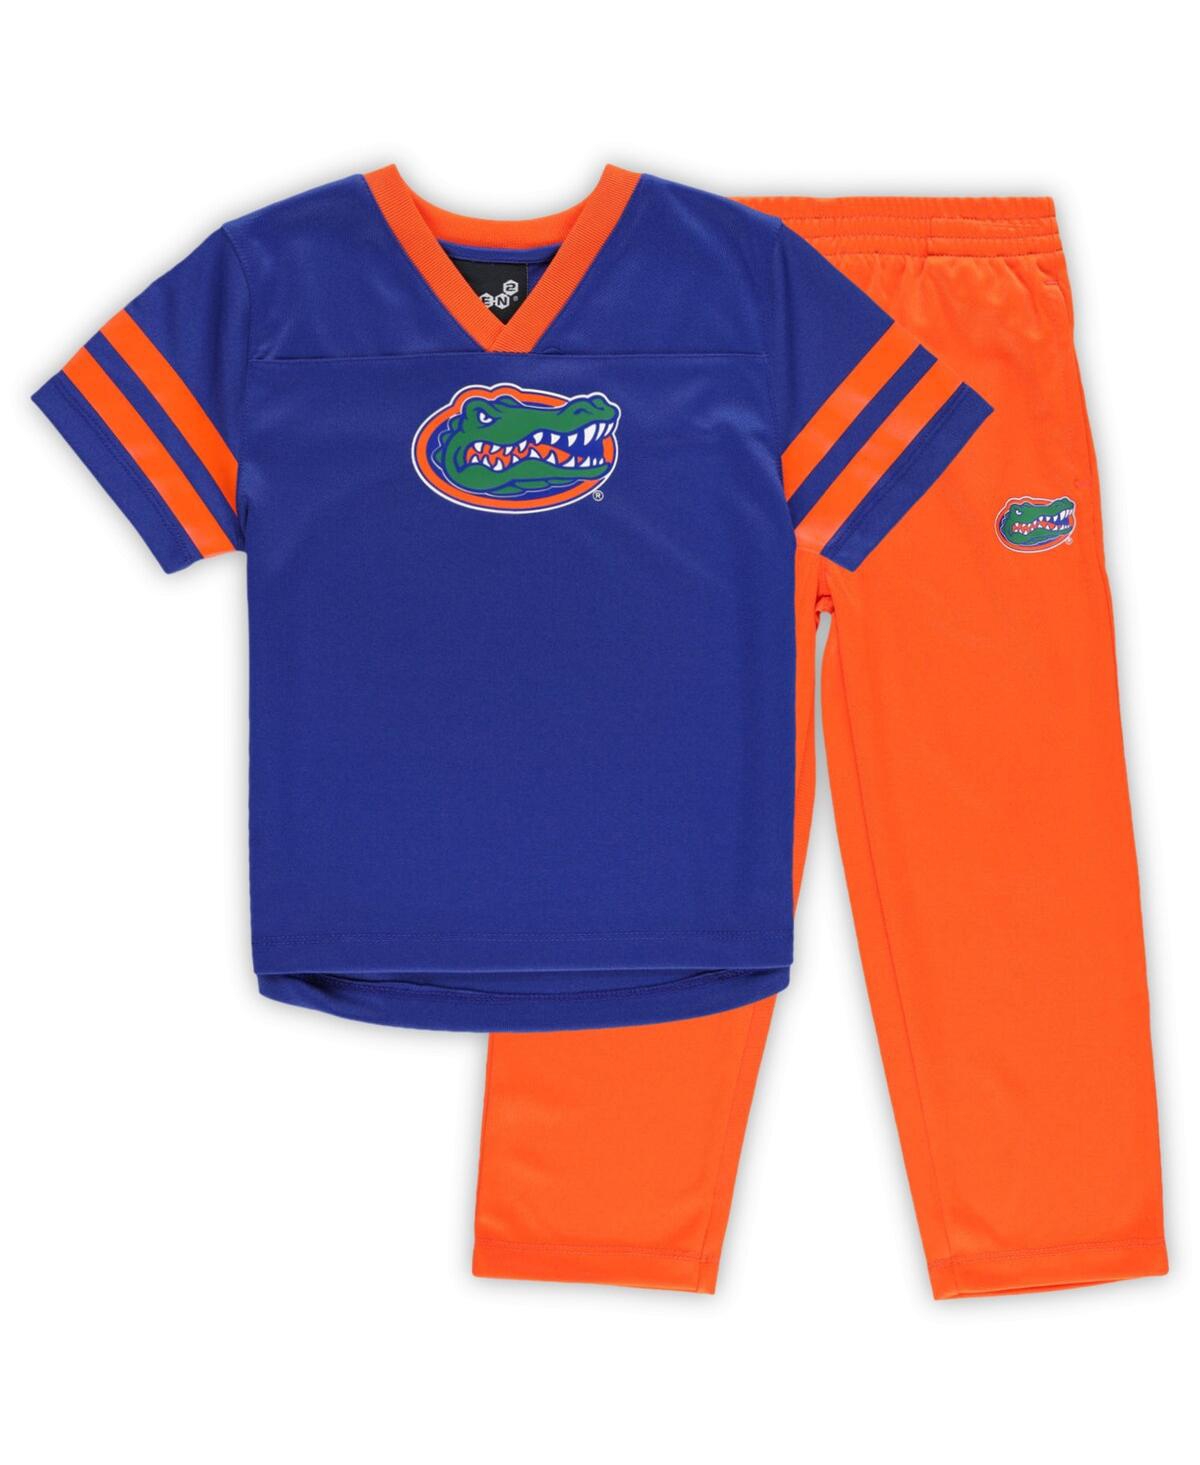 Outerstuff Babies' Toddler Boys And Girls Royal And Orange Florida Gators Red Zone Jersey And Pants Set In Royal,orange